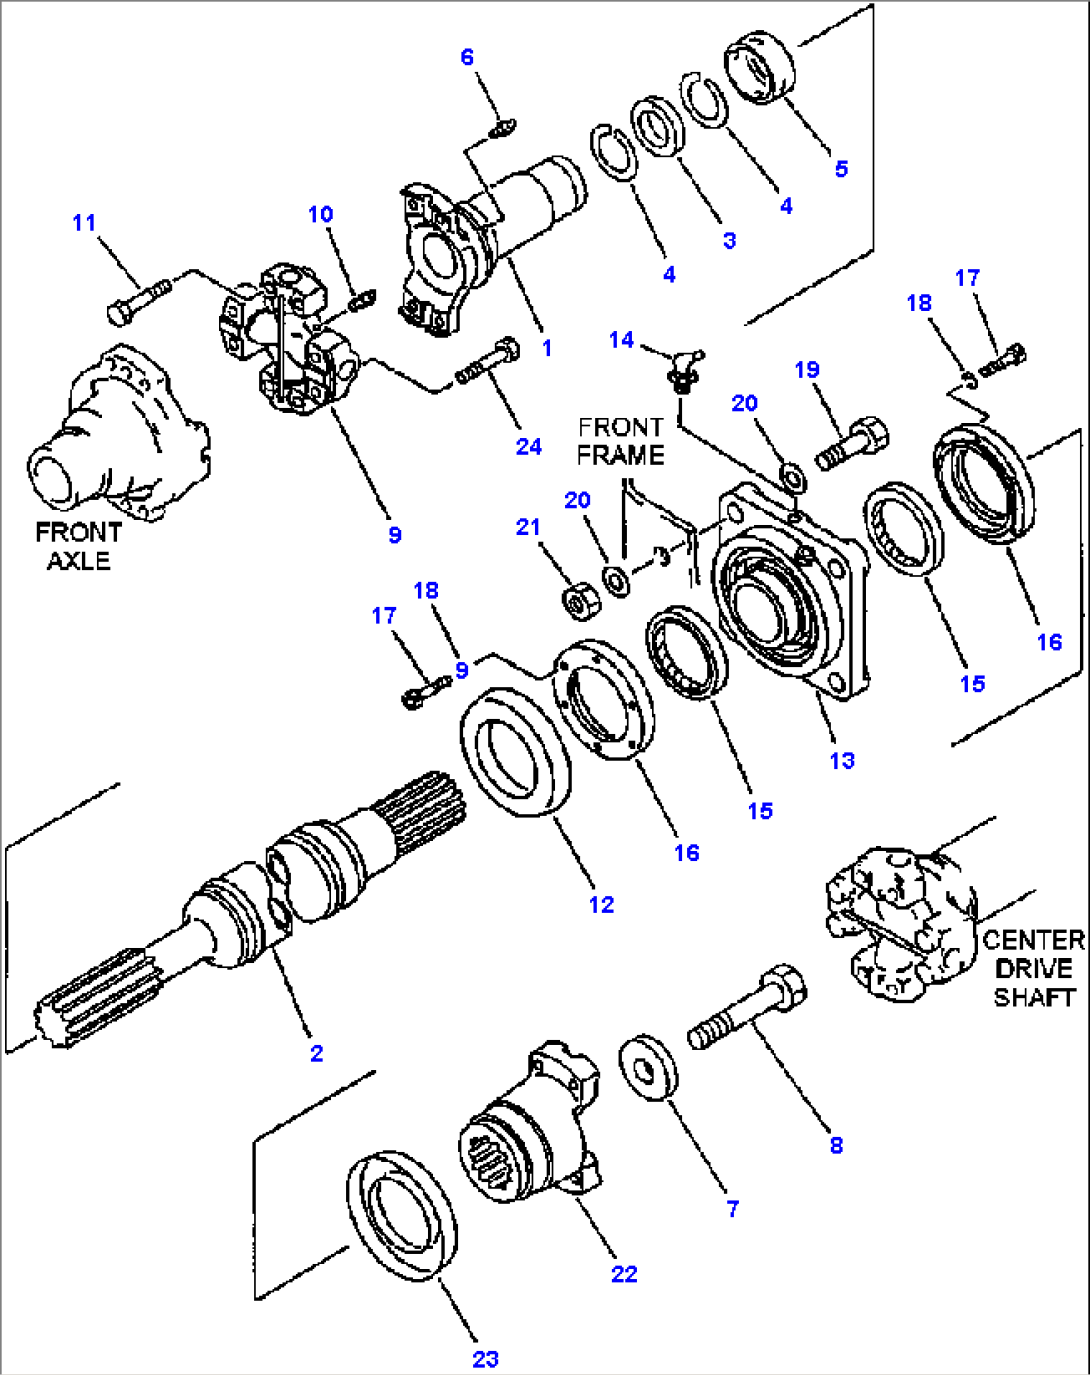 FIG NO. 3001A FRONT DRIVE SHAFT ROCKFORD